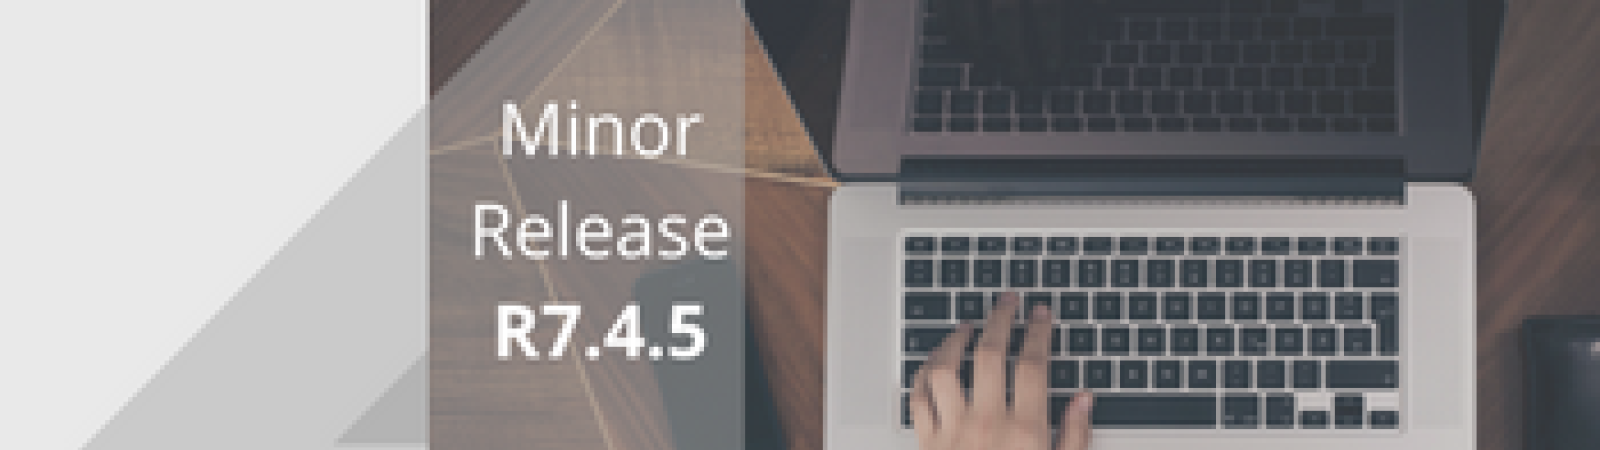 Download Minor Release Now - R7.4.5